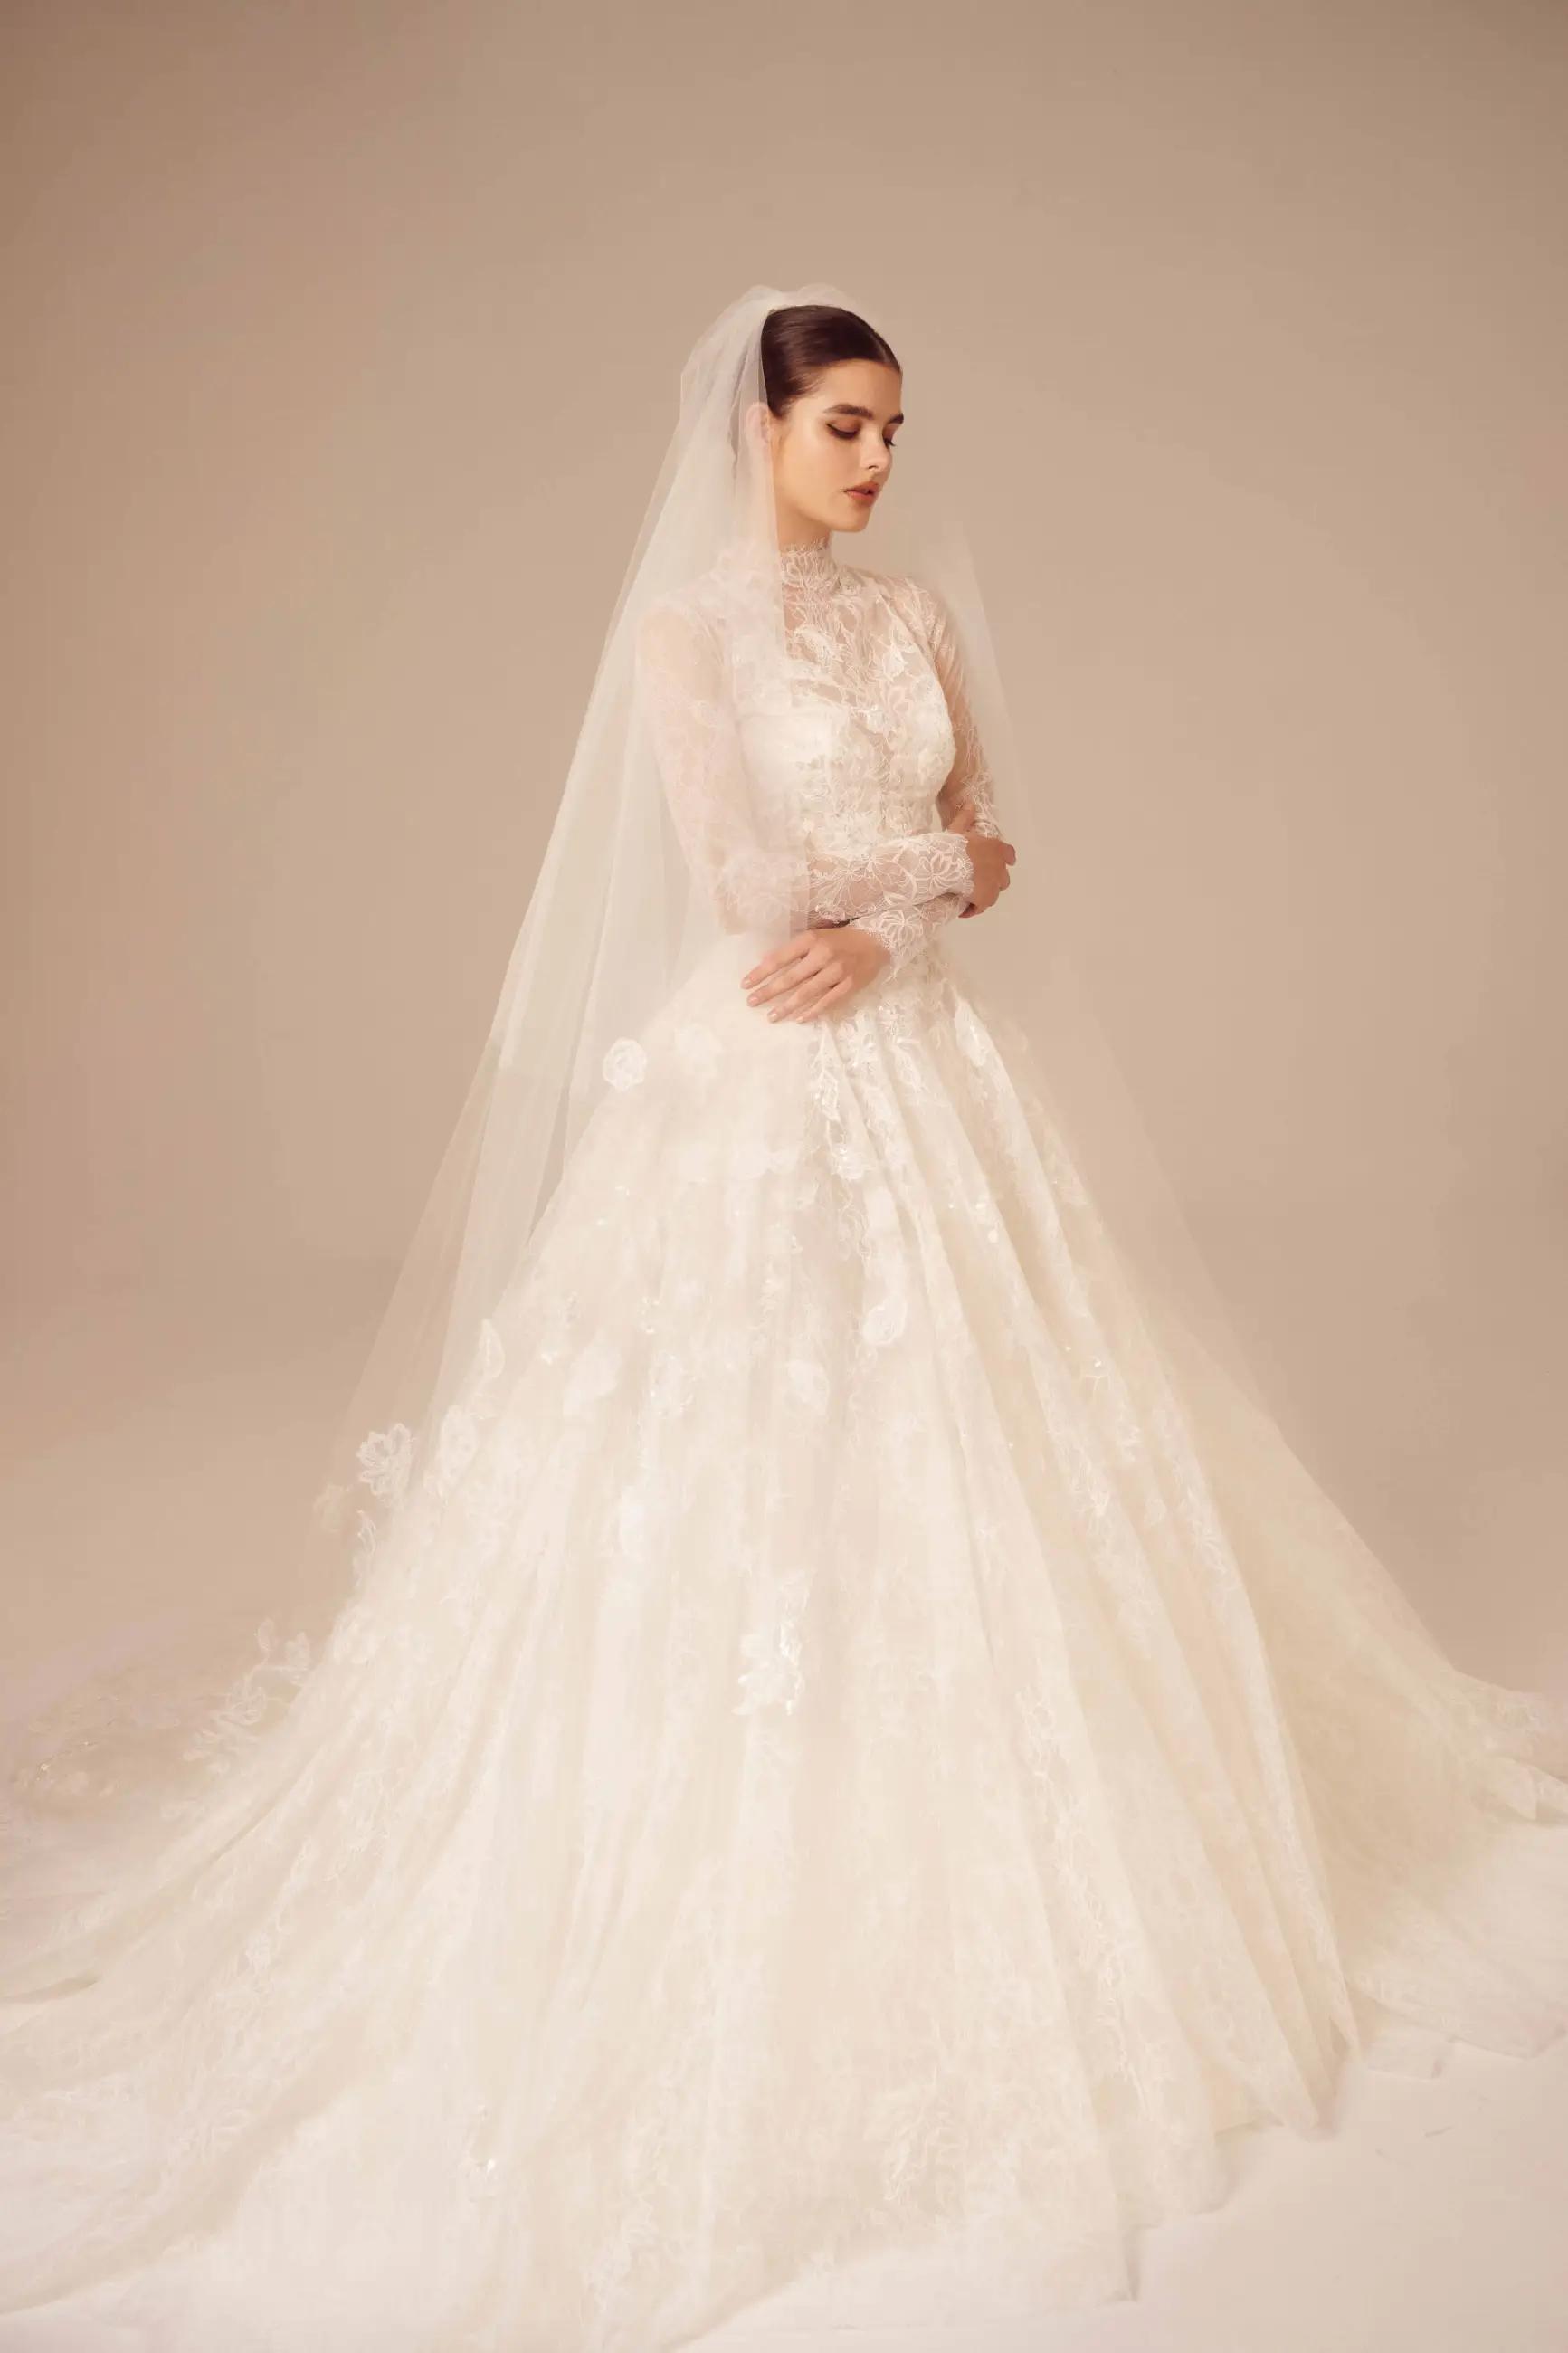 Radiating Love and Light in Nicole And Felicia Bridal Gowns Image